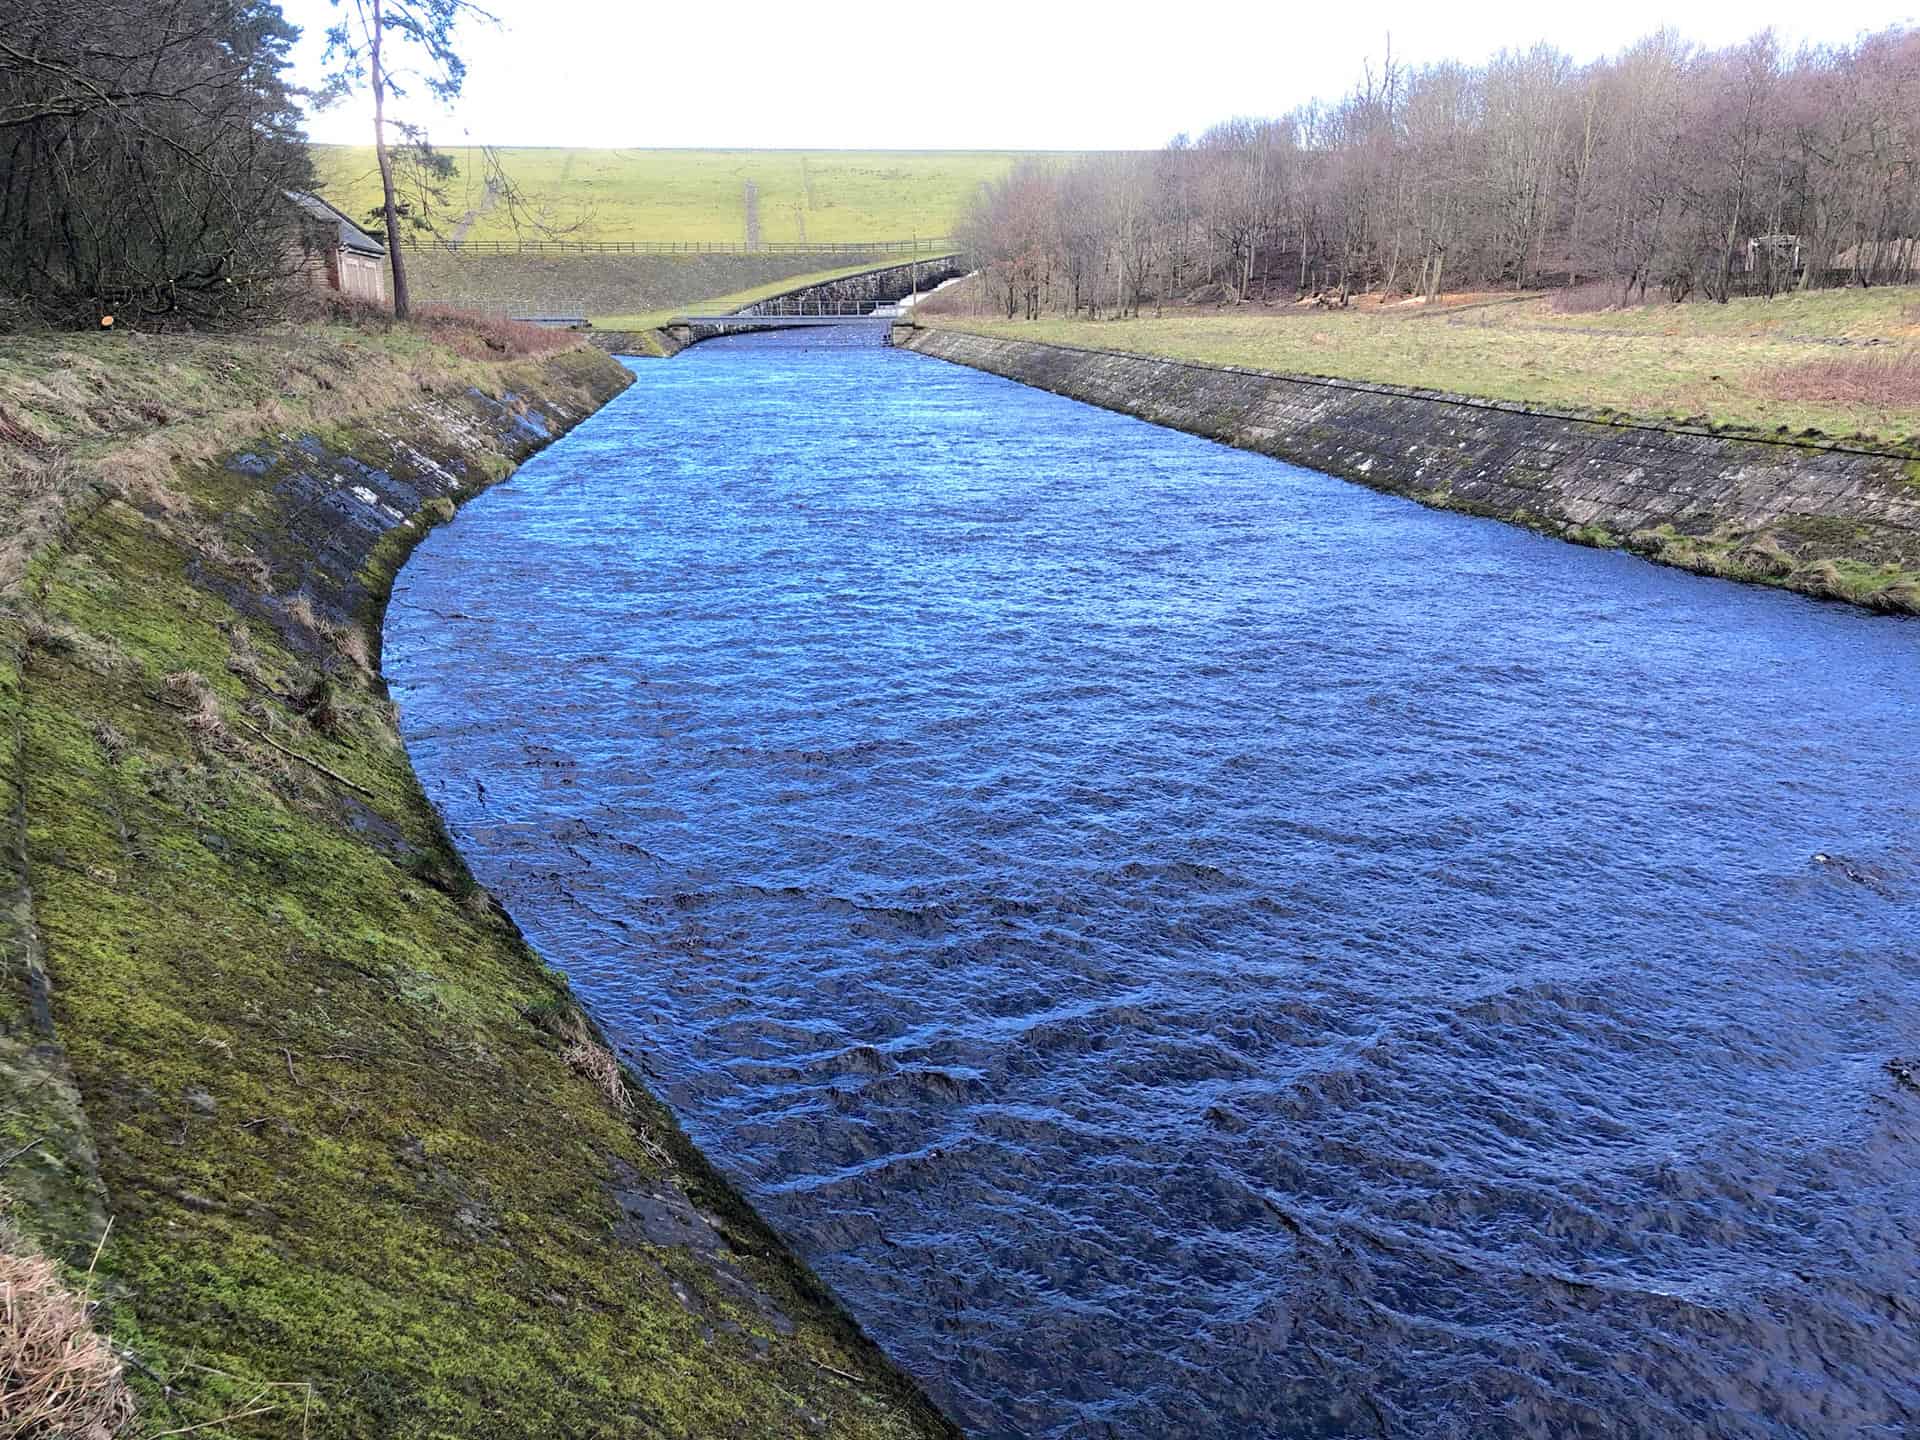 Leighton Reservoir primary overflow area and weir. Water is drained from the northern end of the reservoir dam and forms Pott Beck which flows into the River Burn.